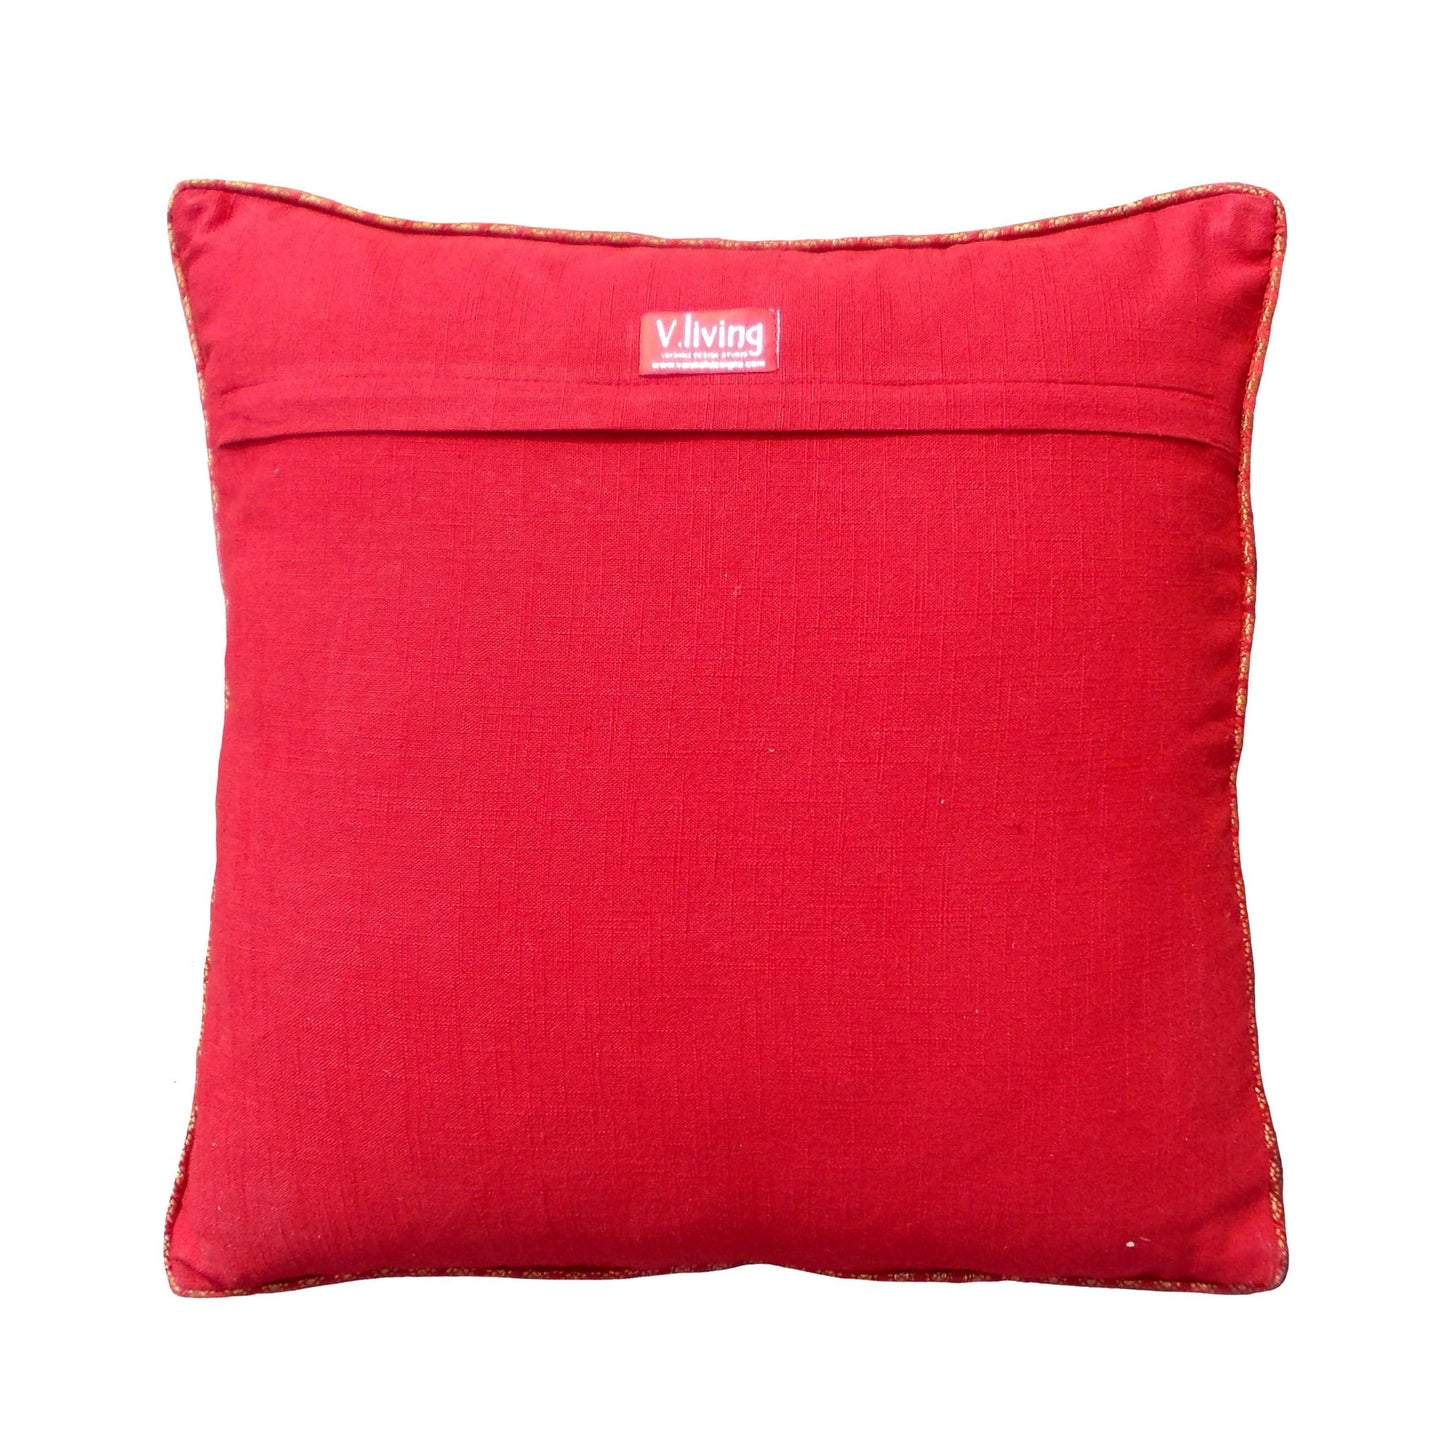 Valentine pillow cover, heart motif, red and linen combination